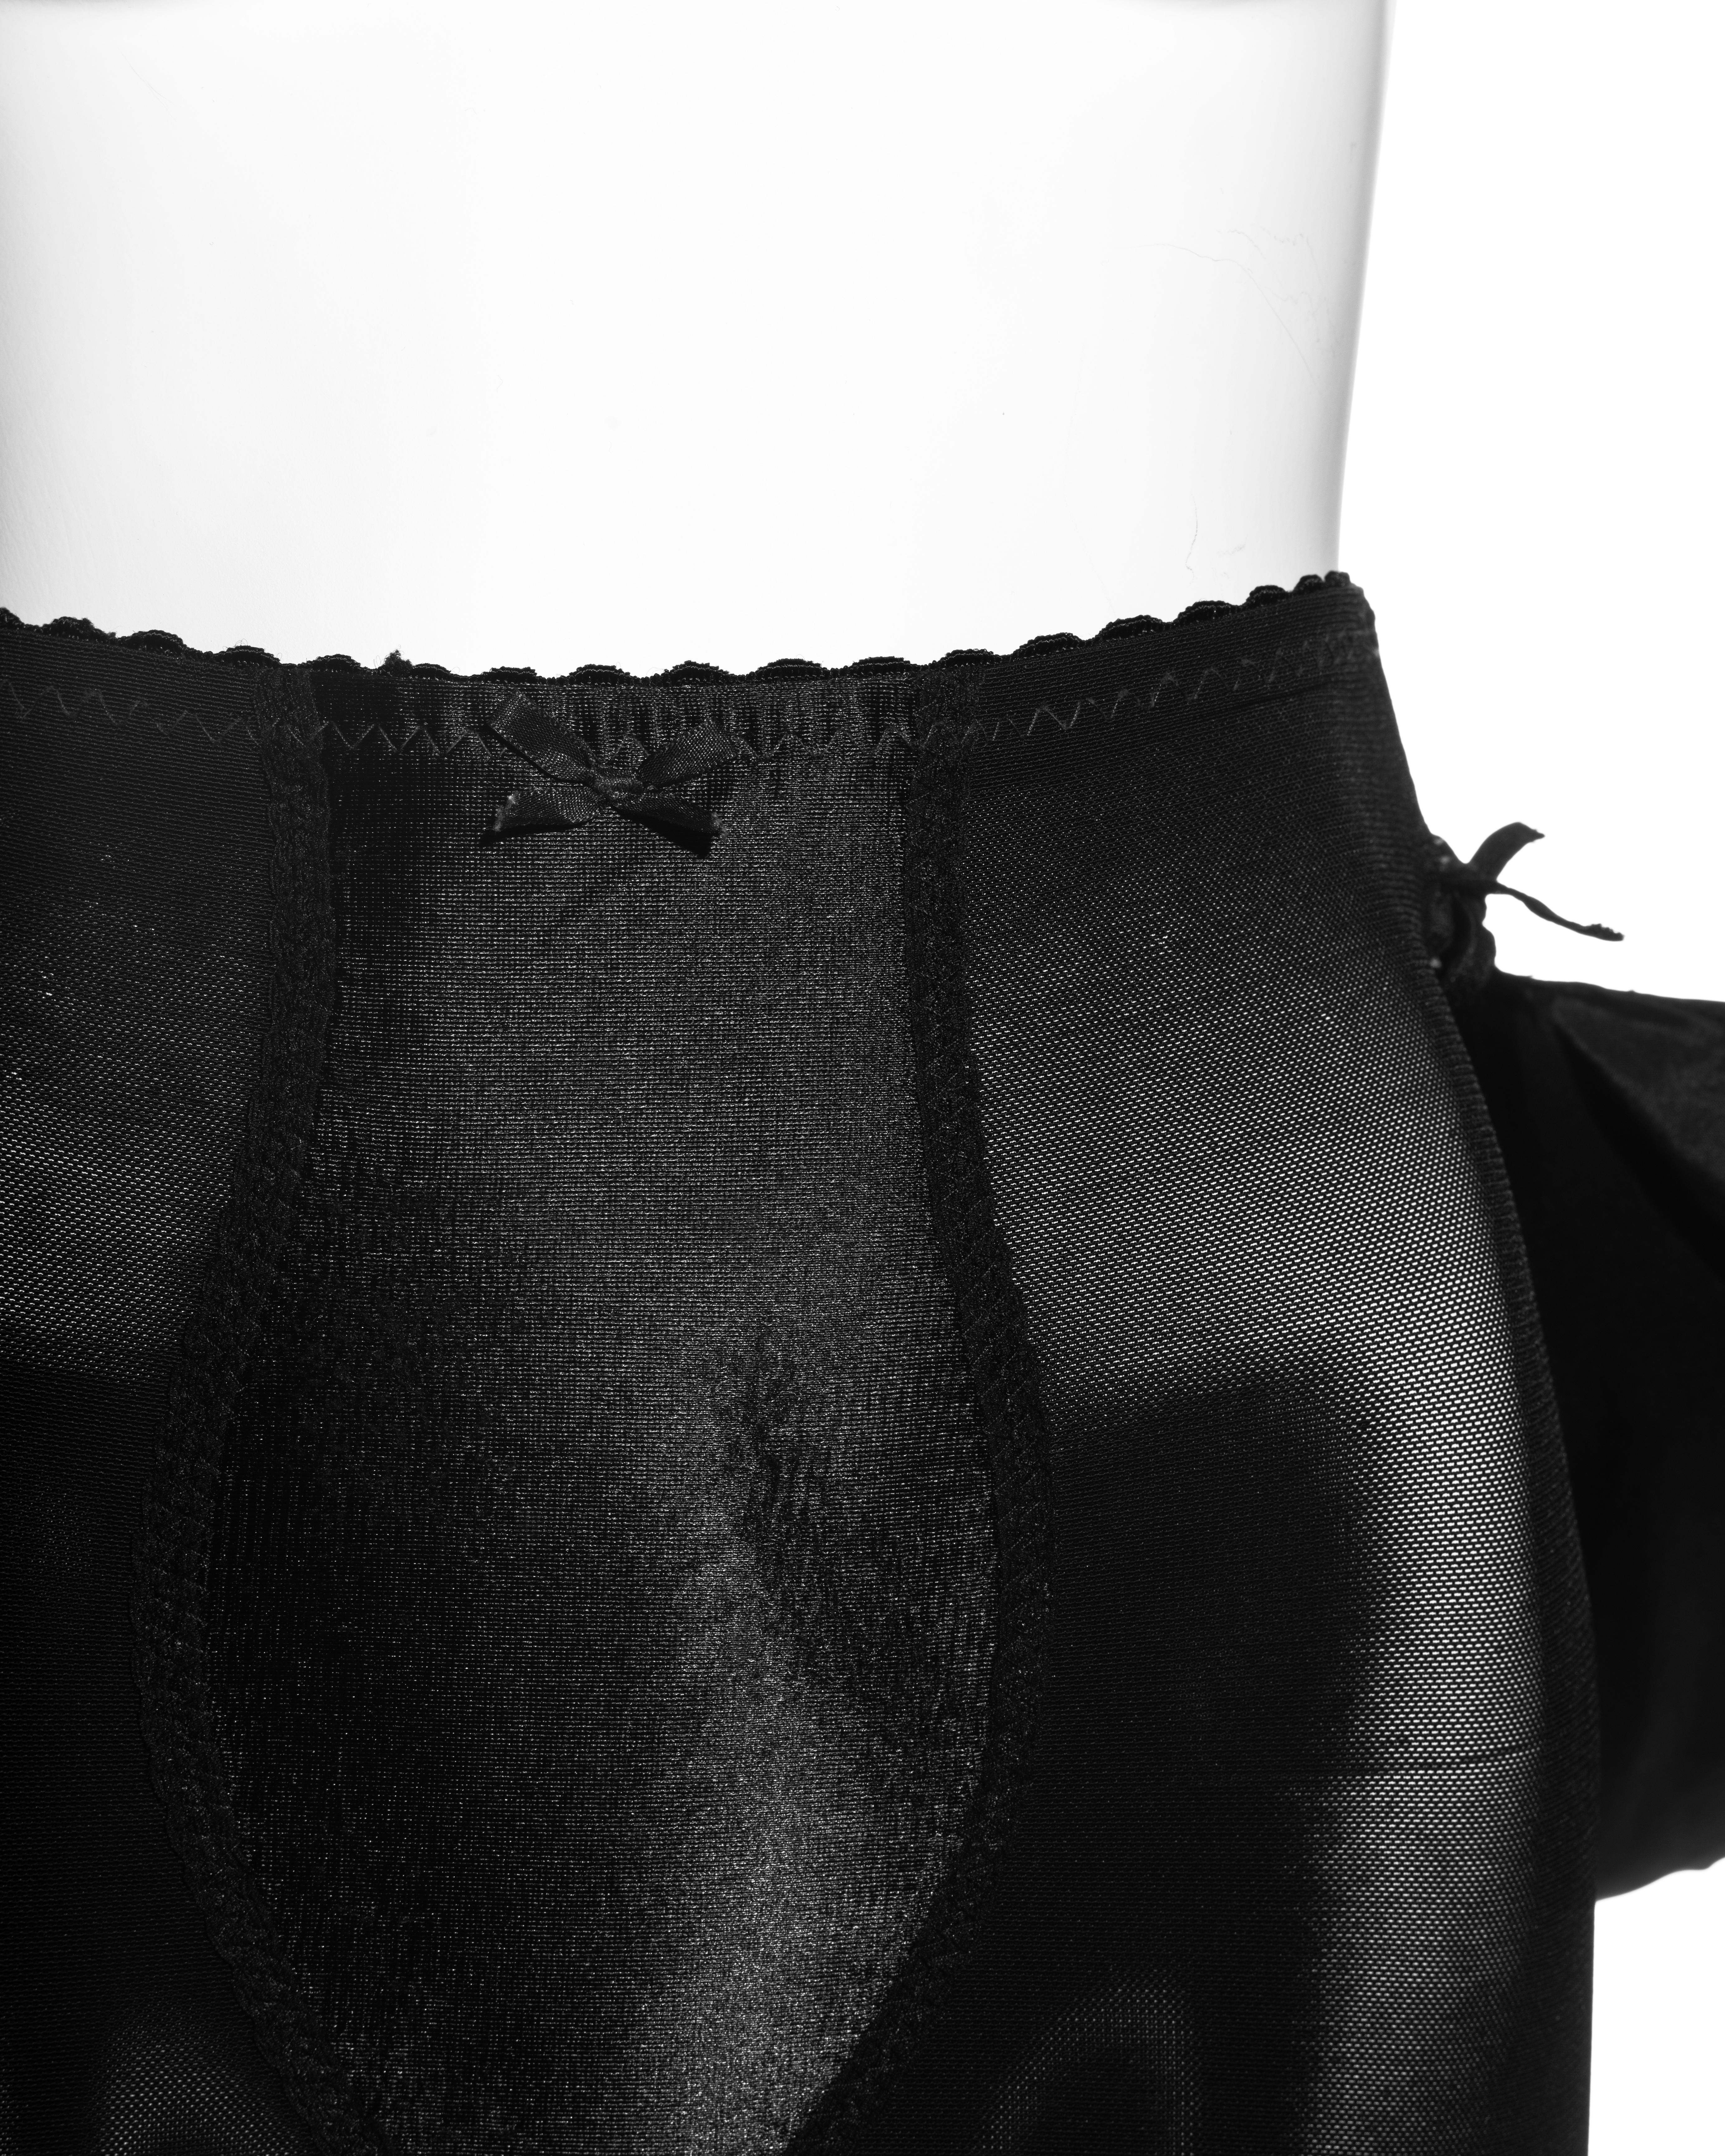 Vivienne Westwood black power mesh and satin panties and bustle set, ss 1995 4